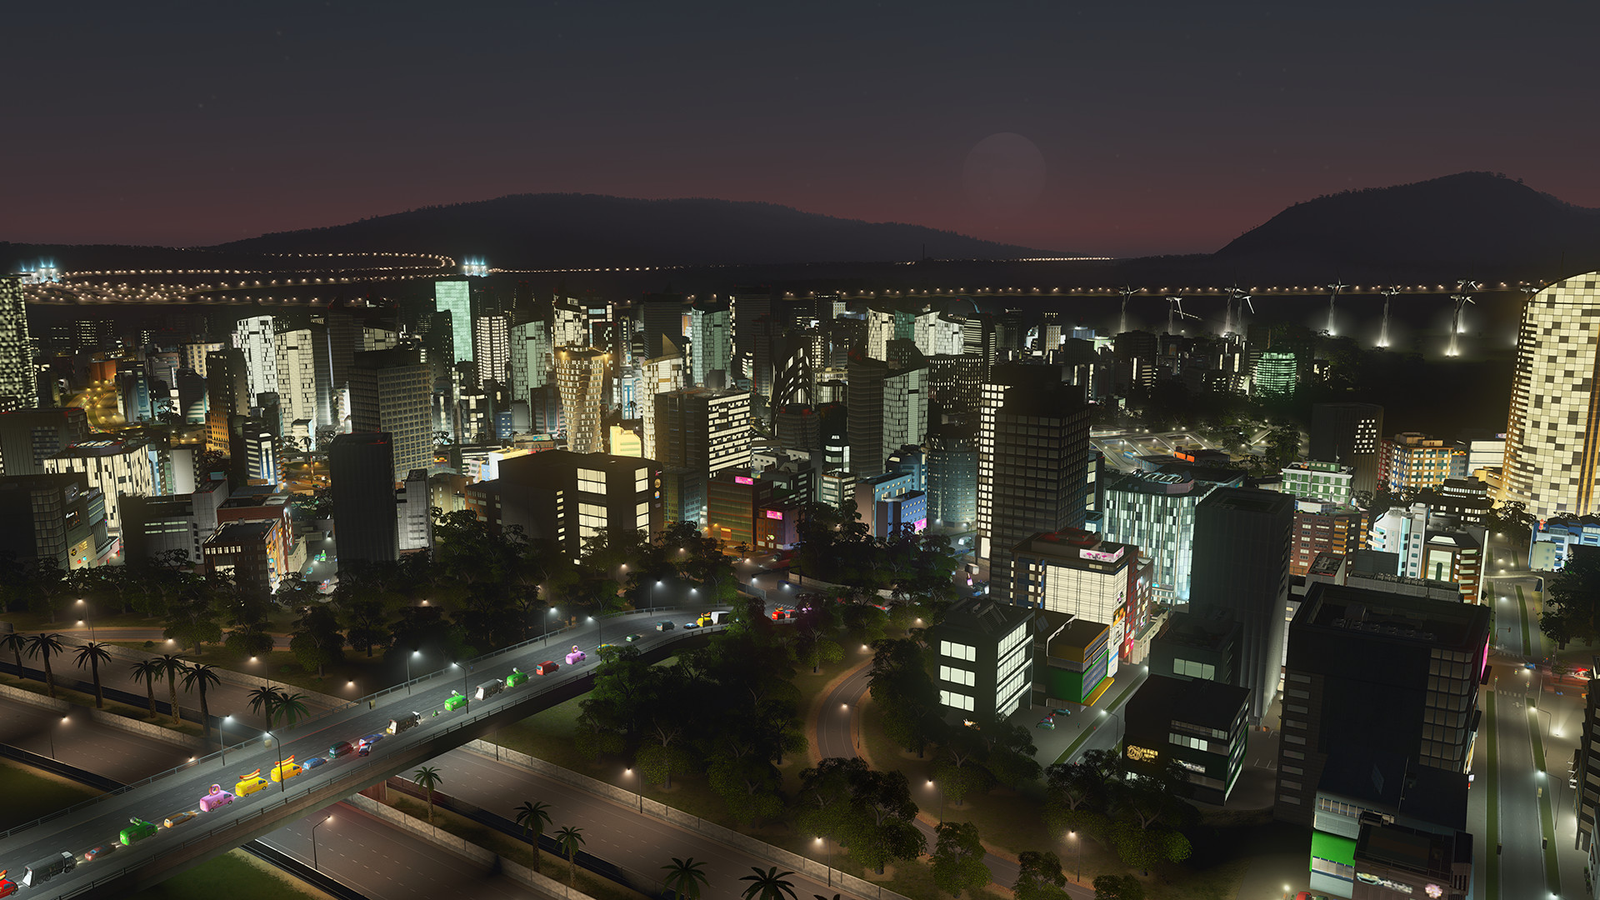 You can now revel in nighttime fun with Cities Skylines: After